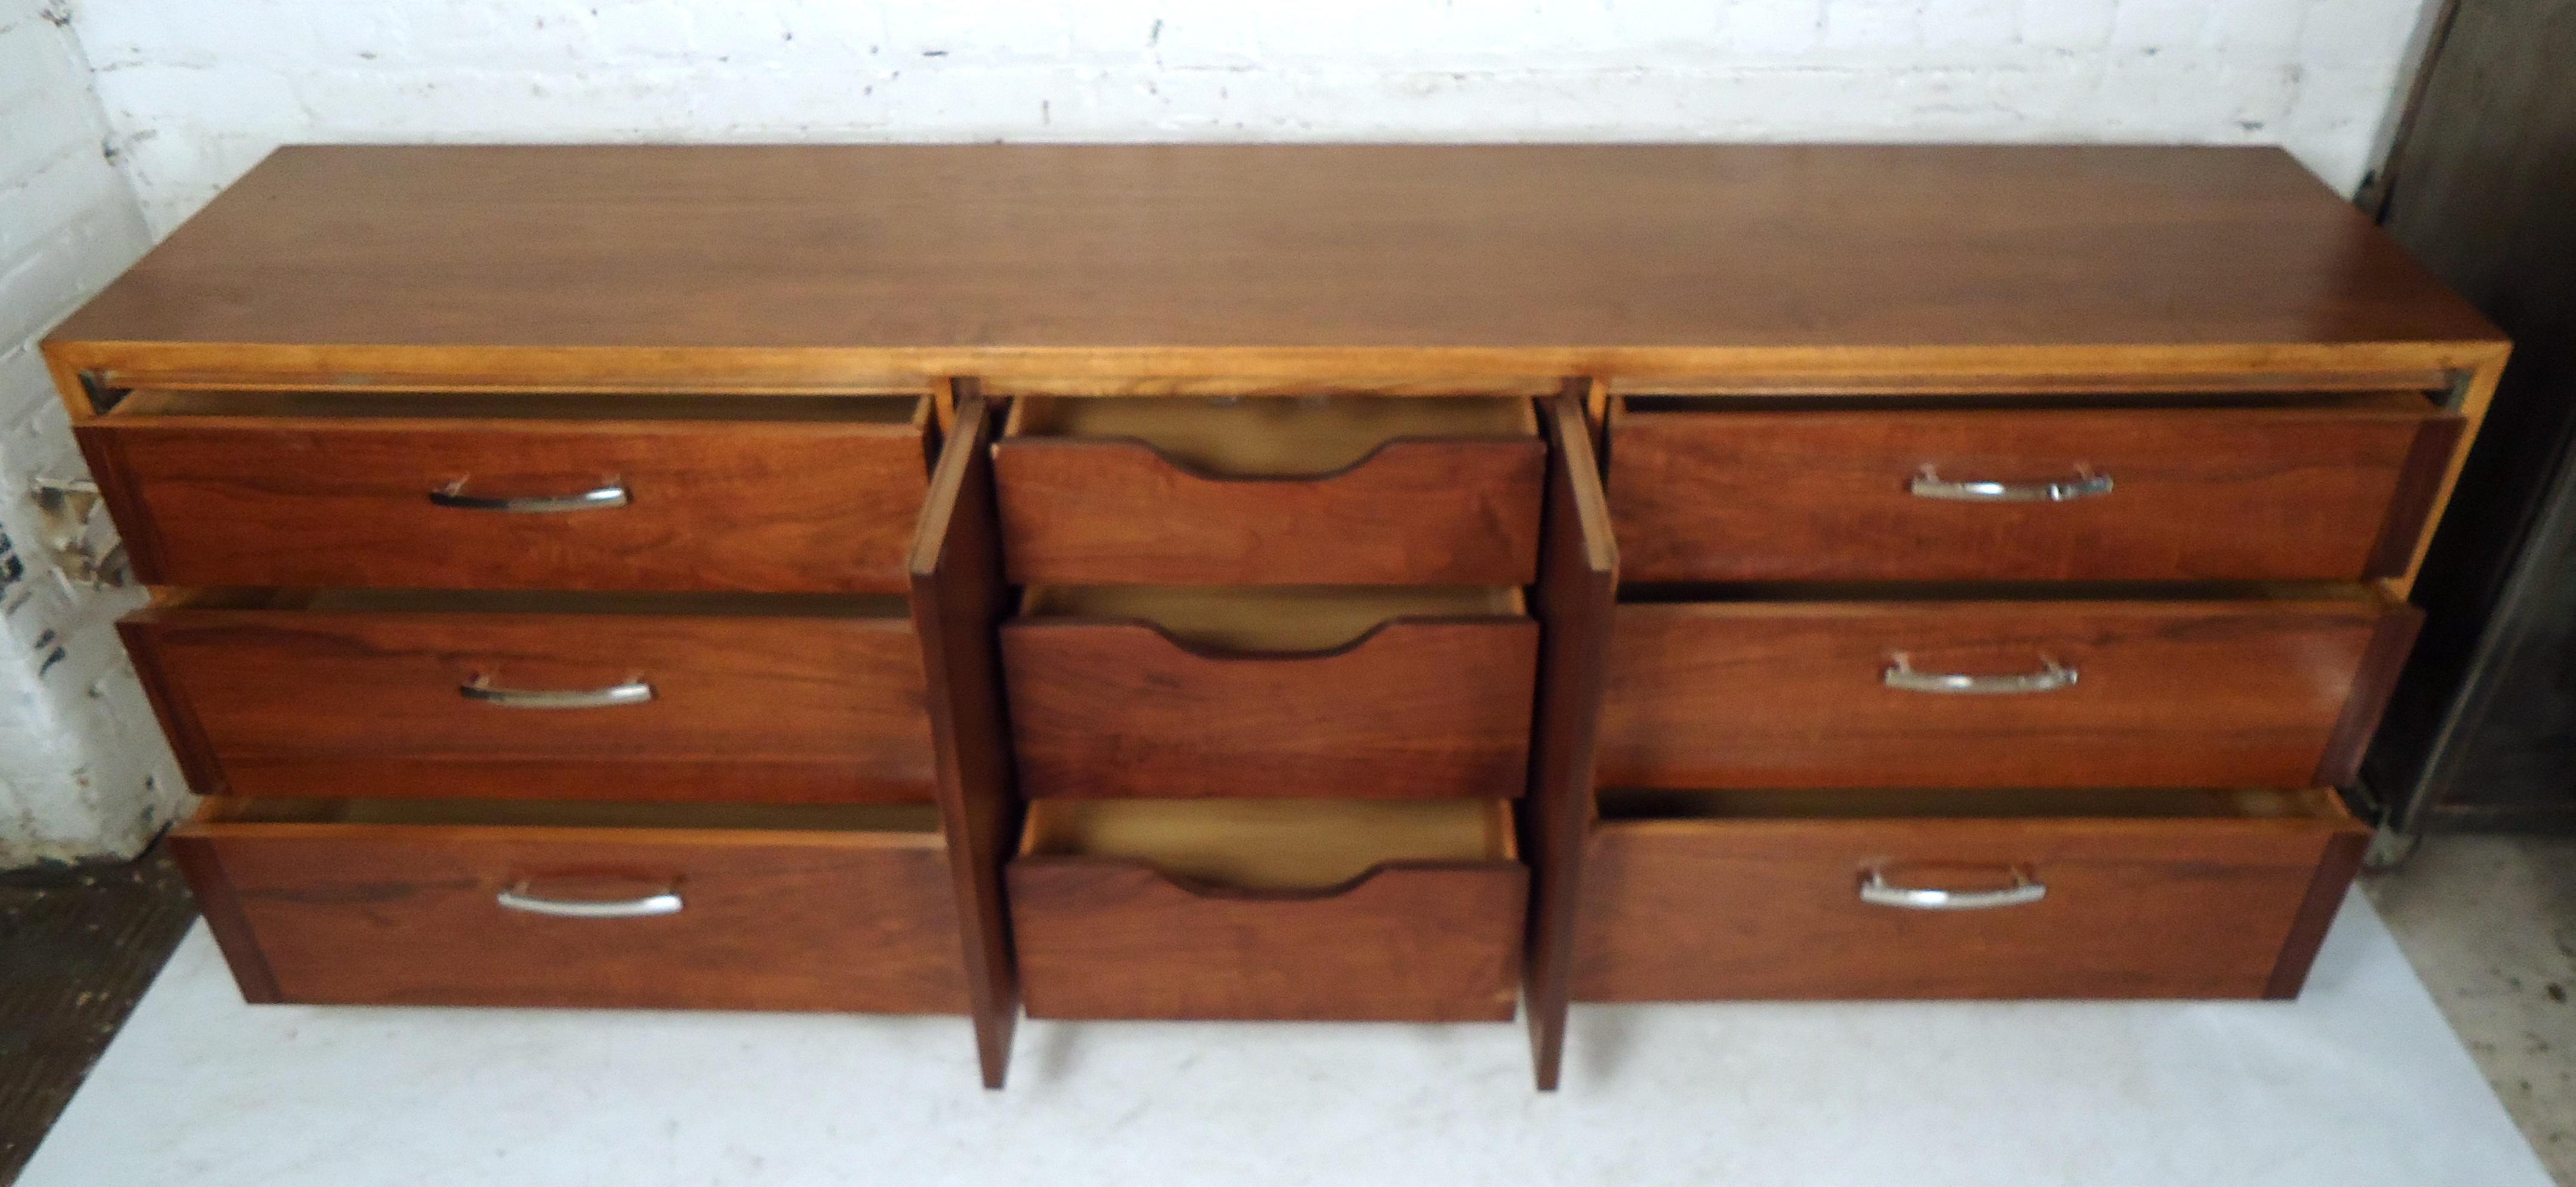 Mid-Century Modern Credenza by Lane For Sale 4